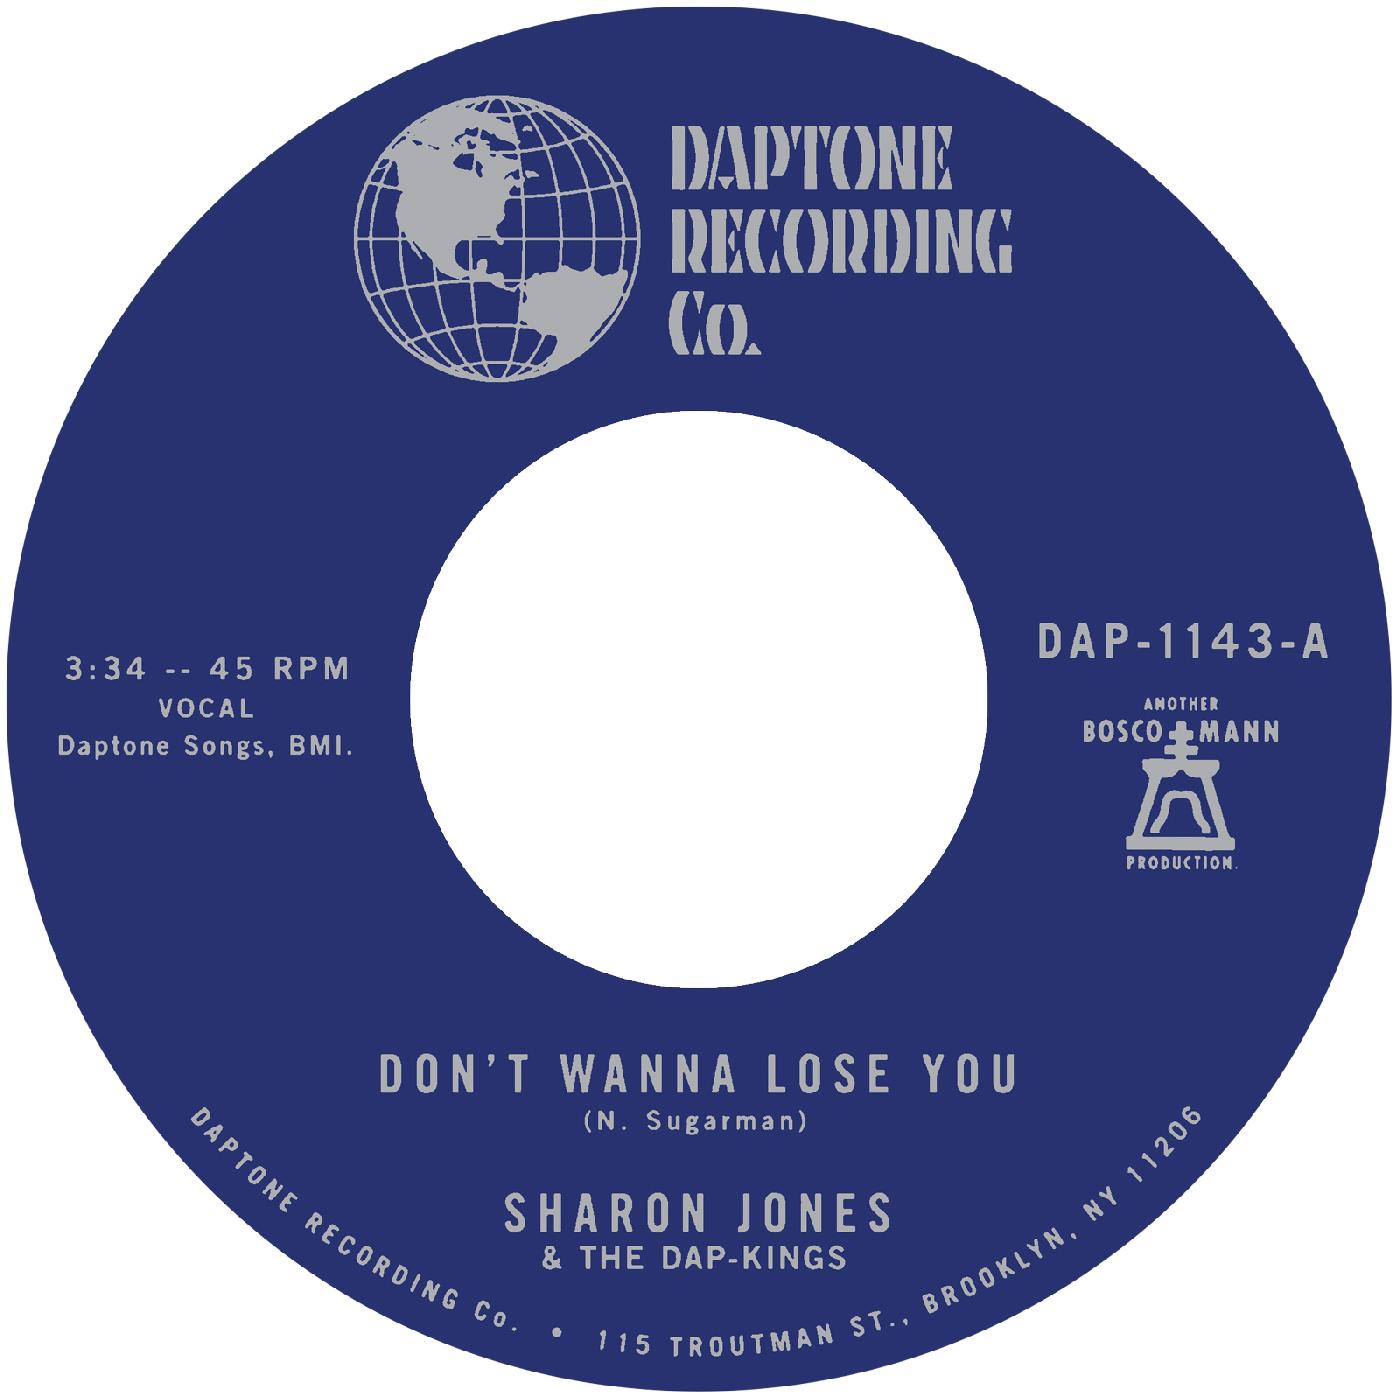 Sharon & The Dap-Kings Jones - Don't Want To Lose You b/w Don't Give a Friend a Number (7-inch Single) (Vinyl)